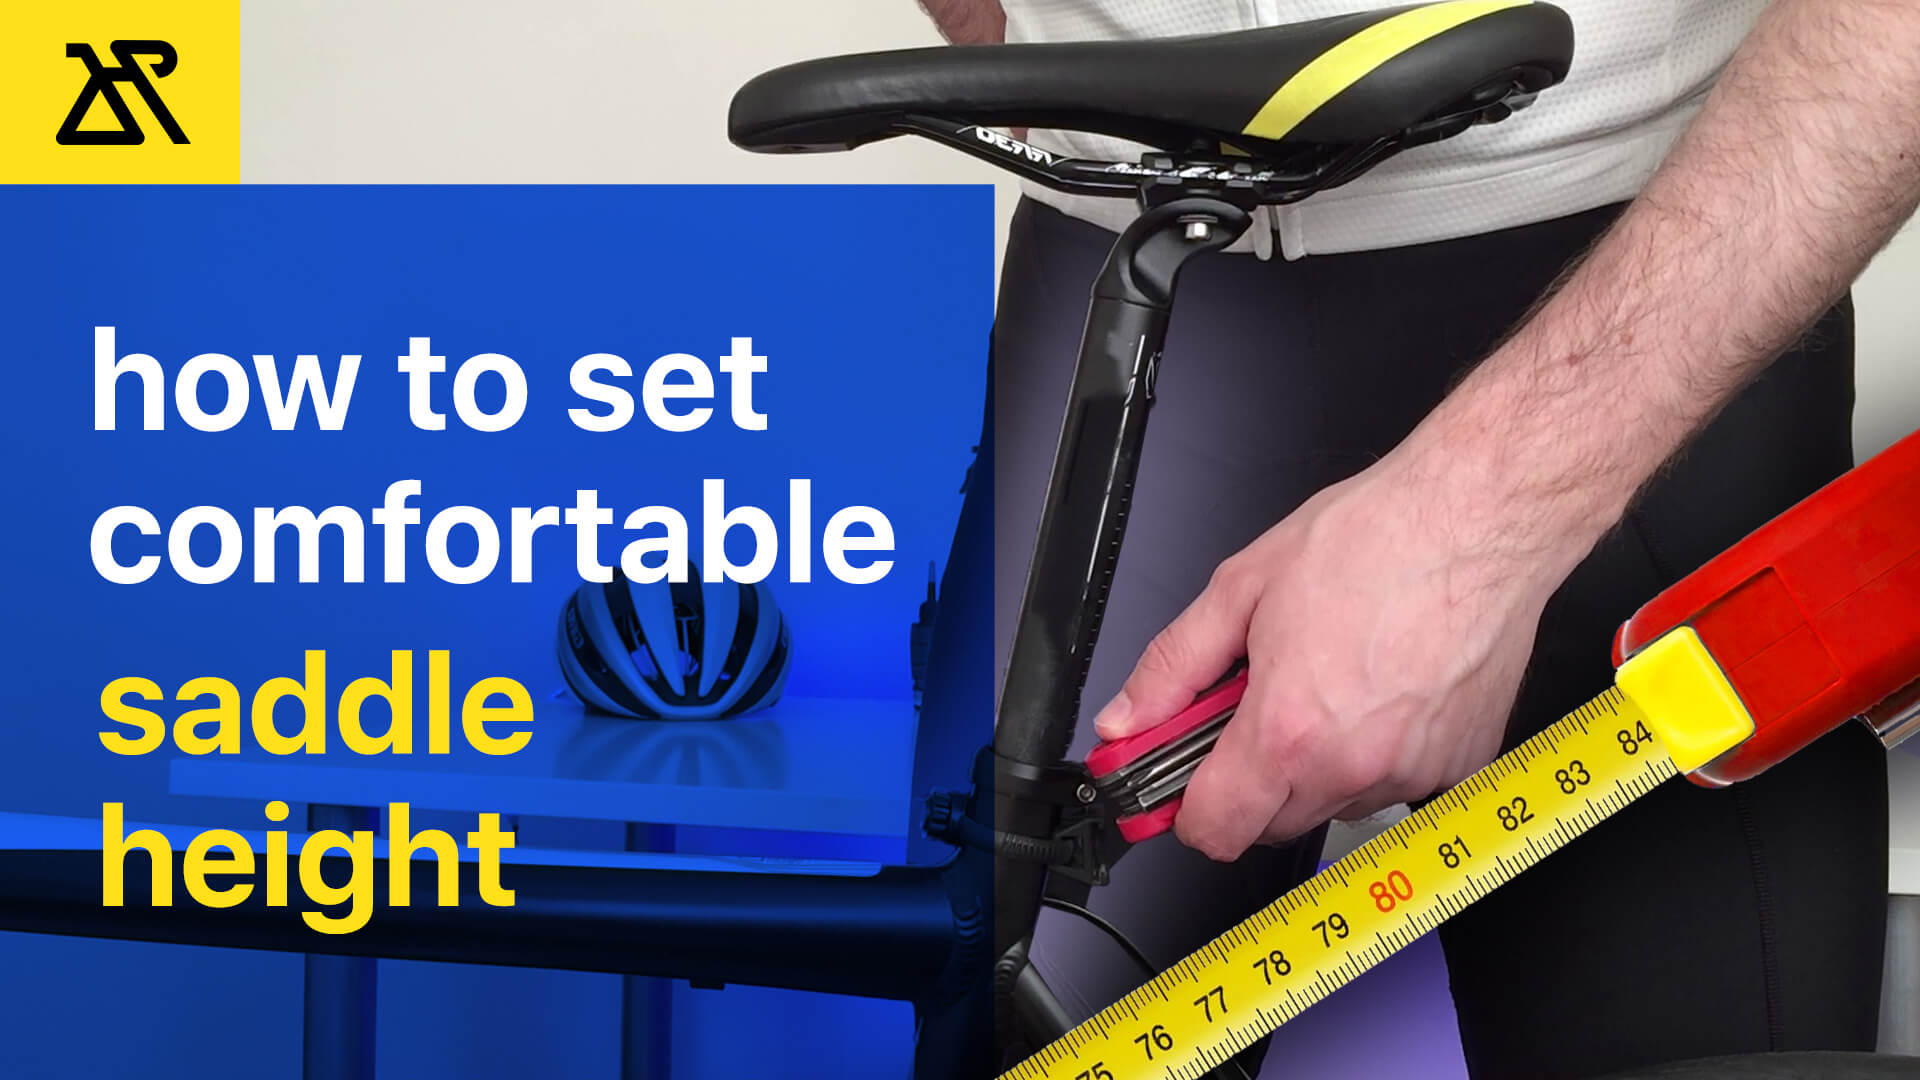 How to Set Saddle Height for Comfortable Endurance Cycling